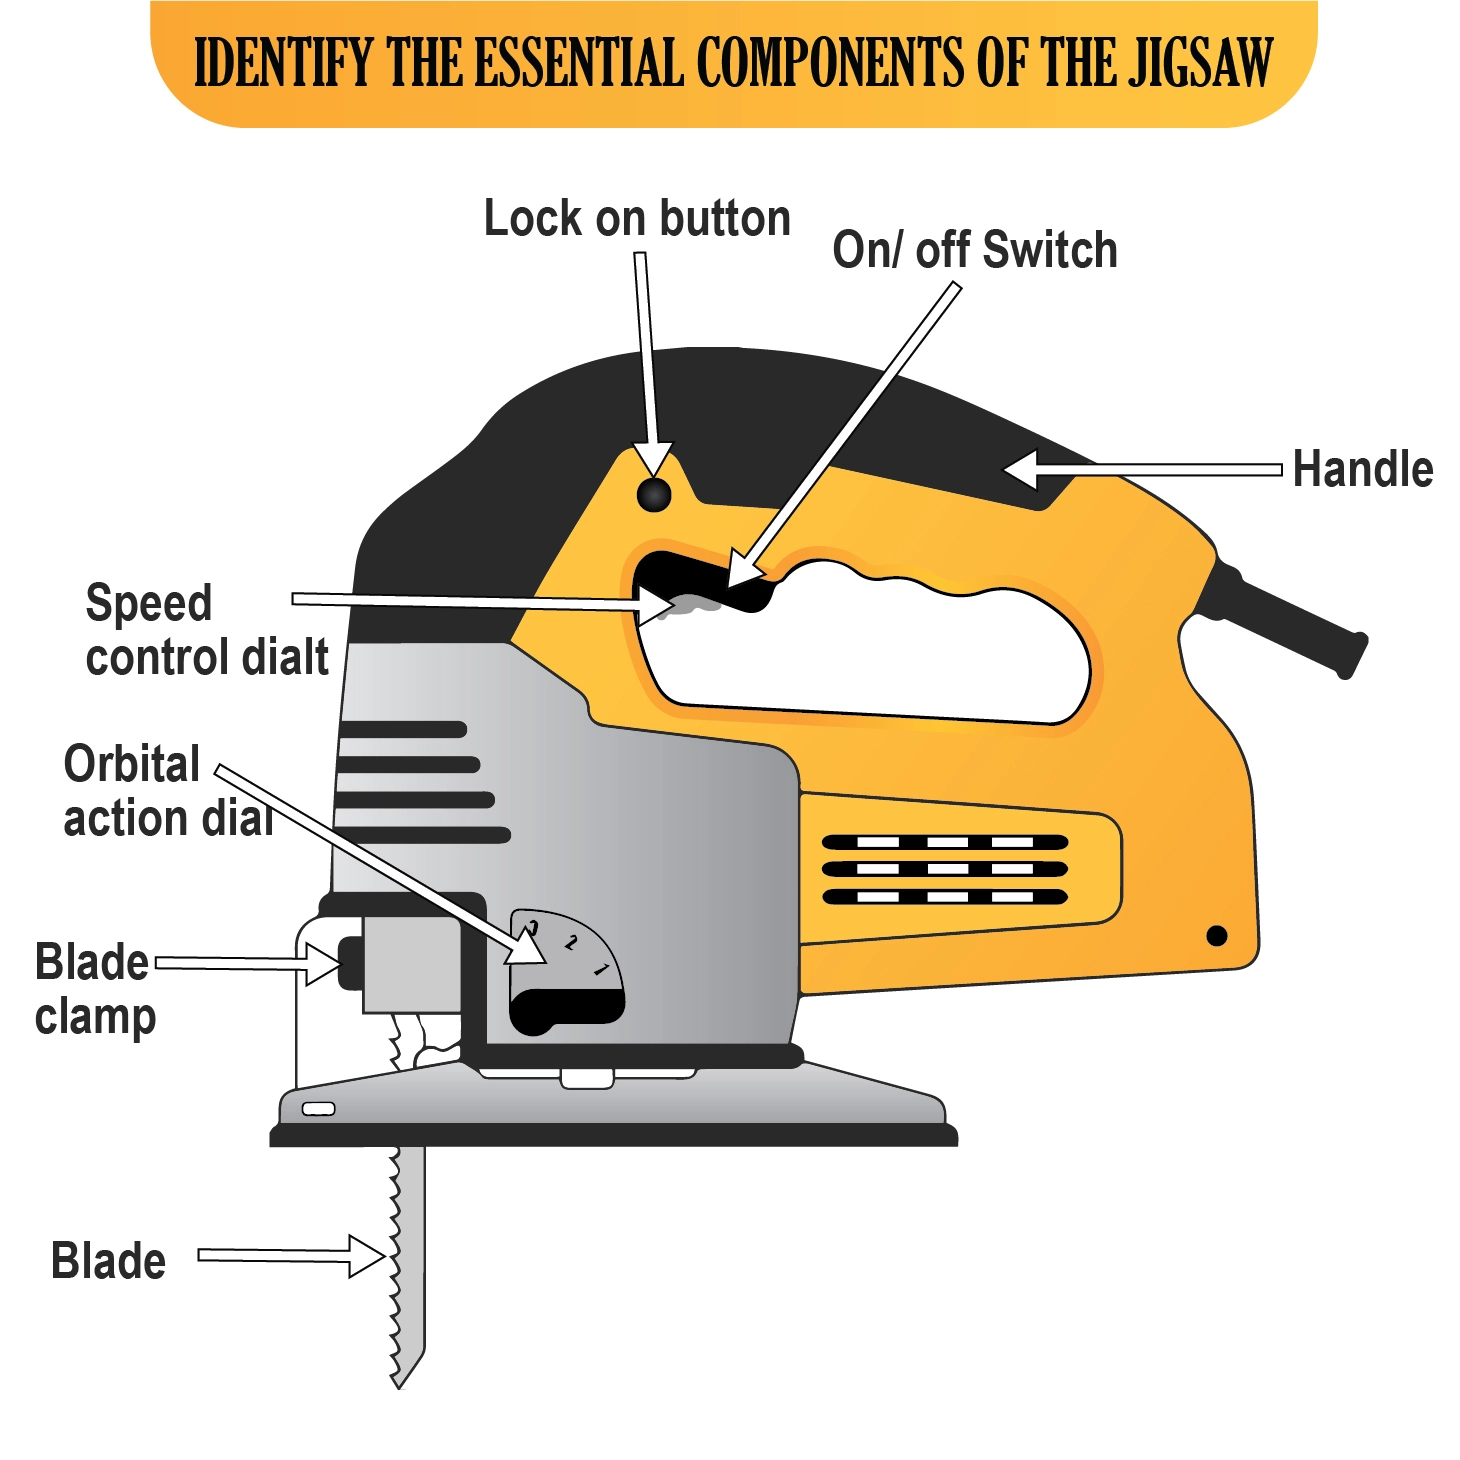 Identify the essential components of the jigsaw